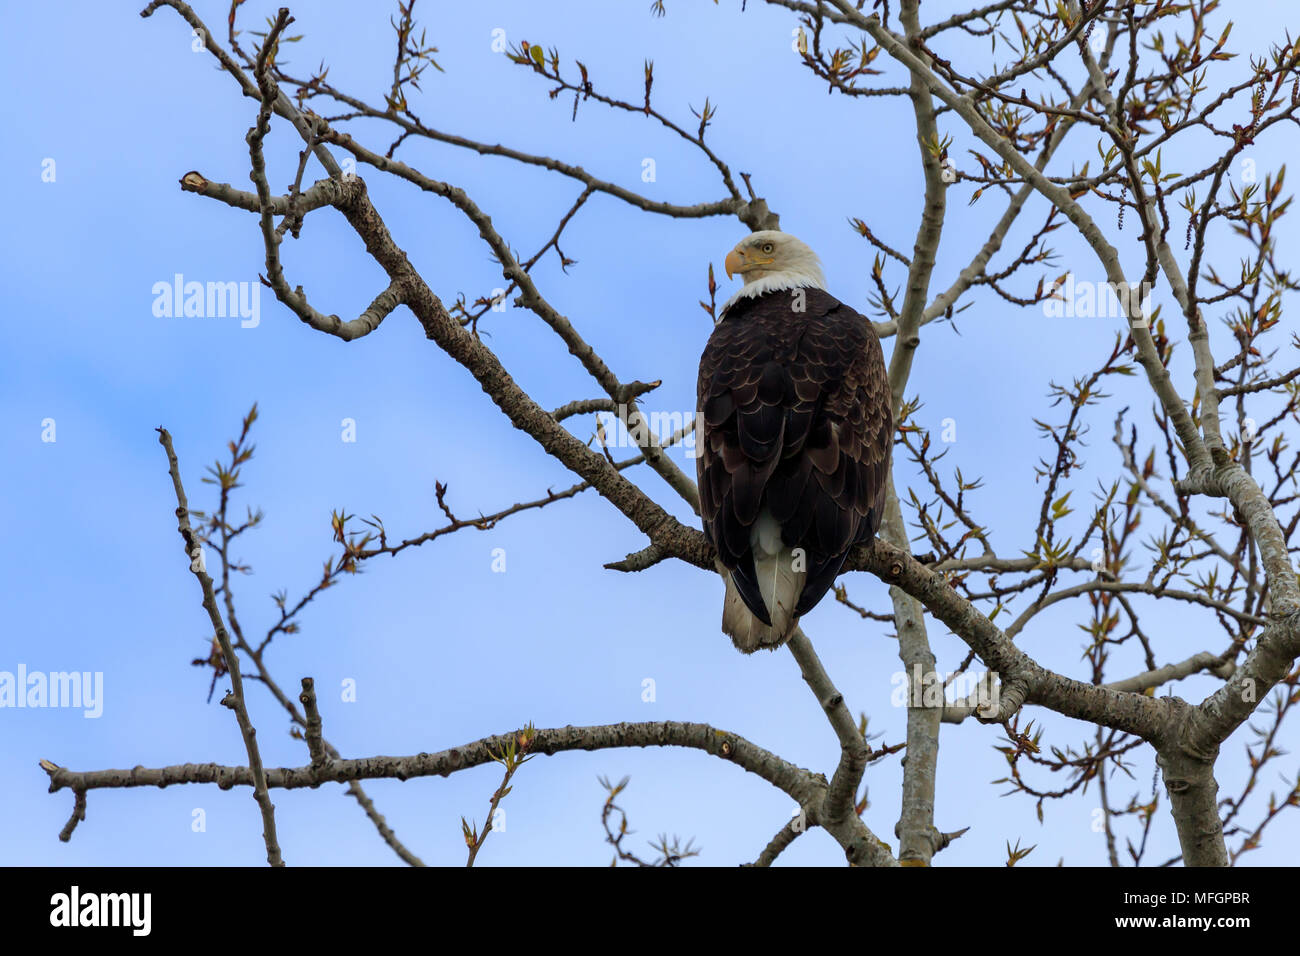 Bald Eagle perched on a tree branch Stock Photo